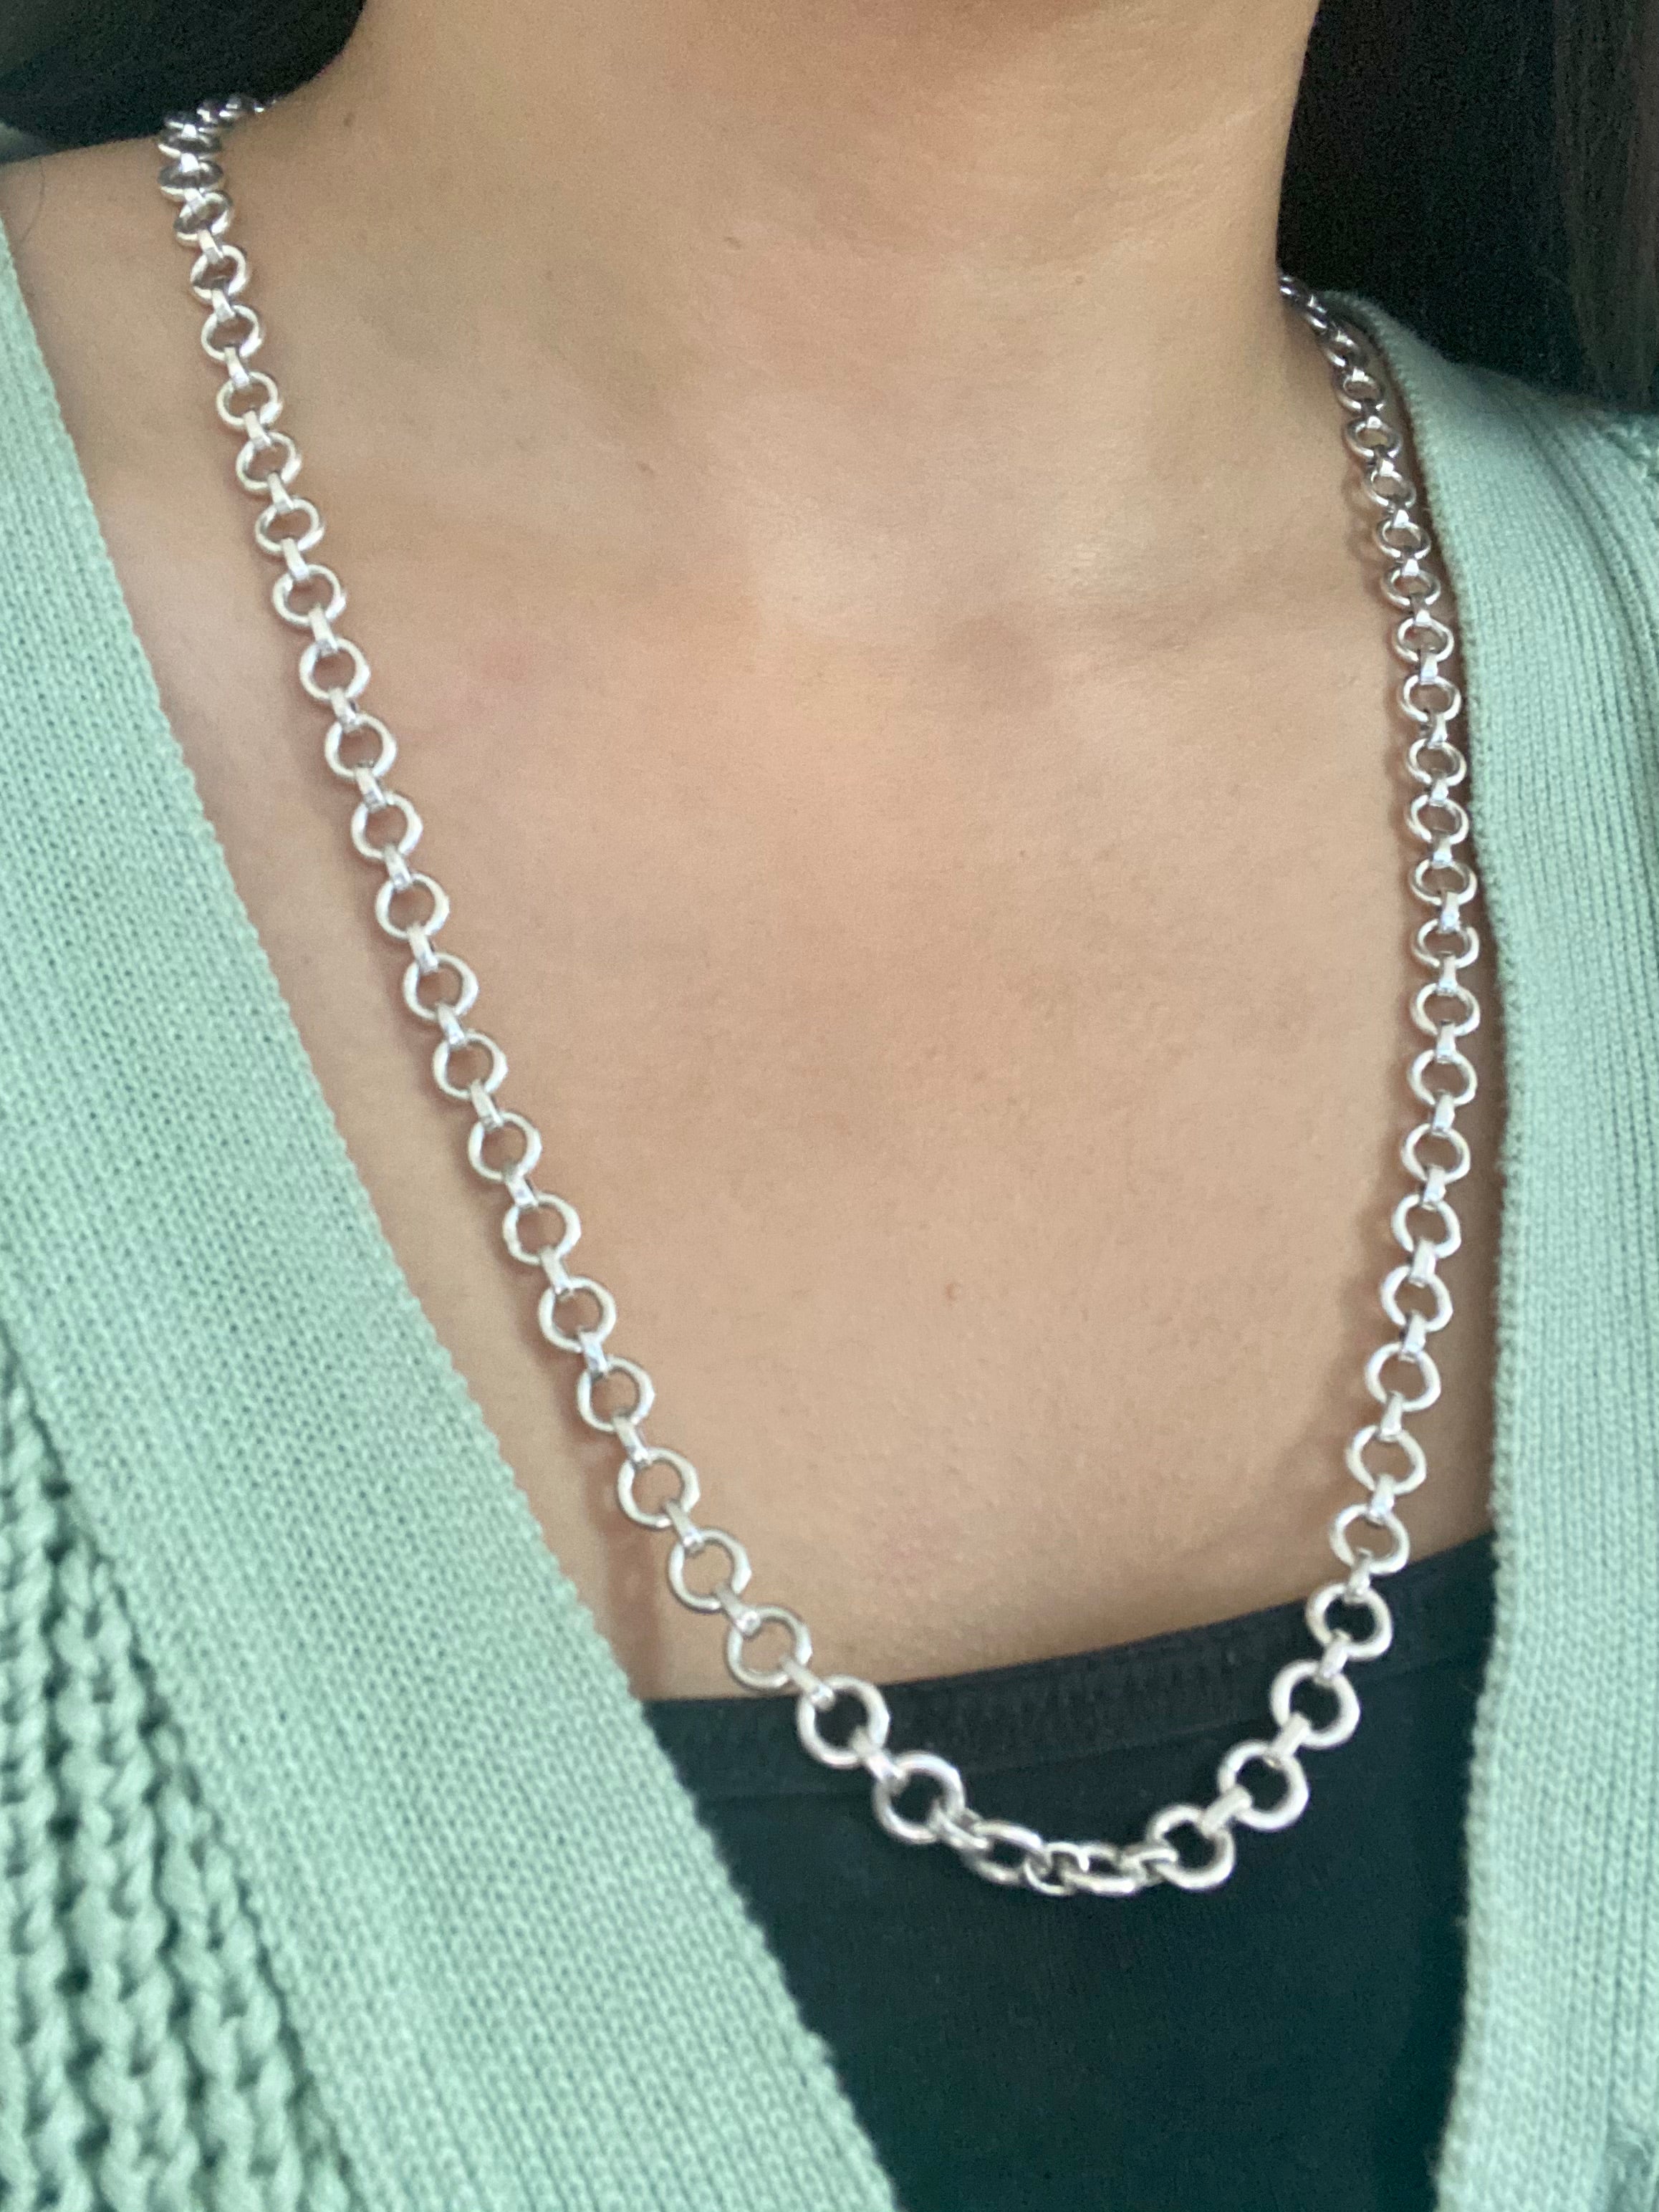 Statement Sterling Silver Necklace with small round links